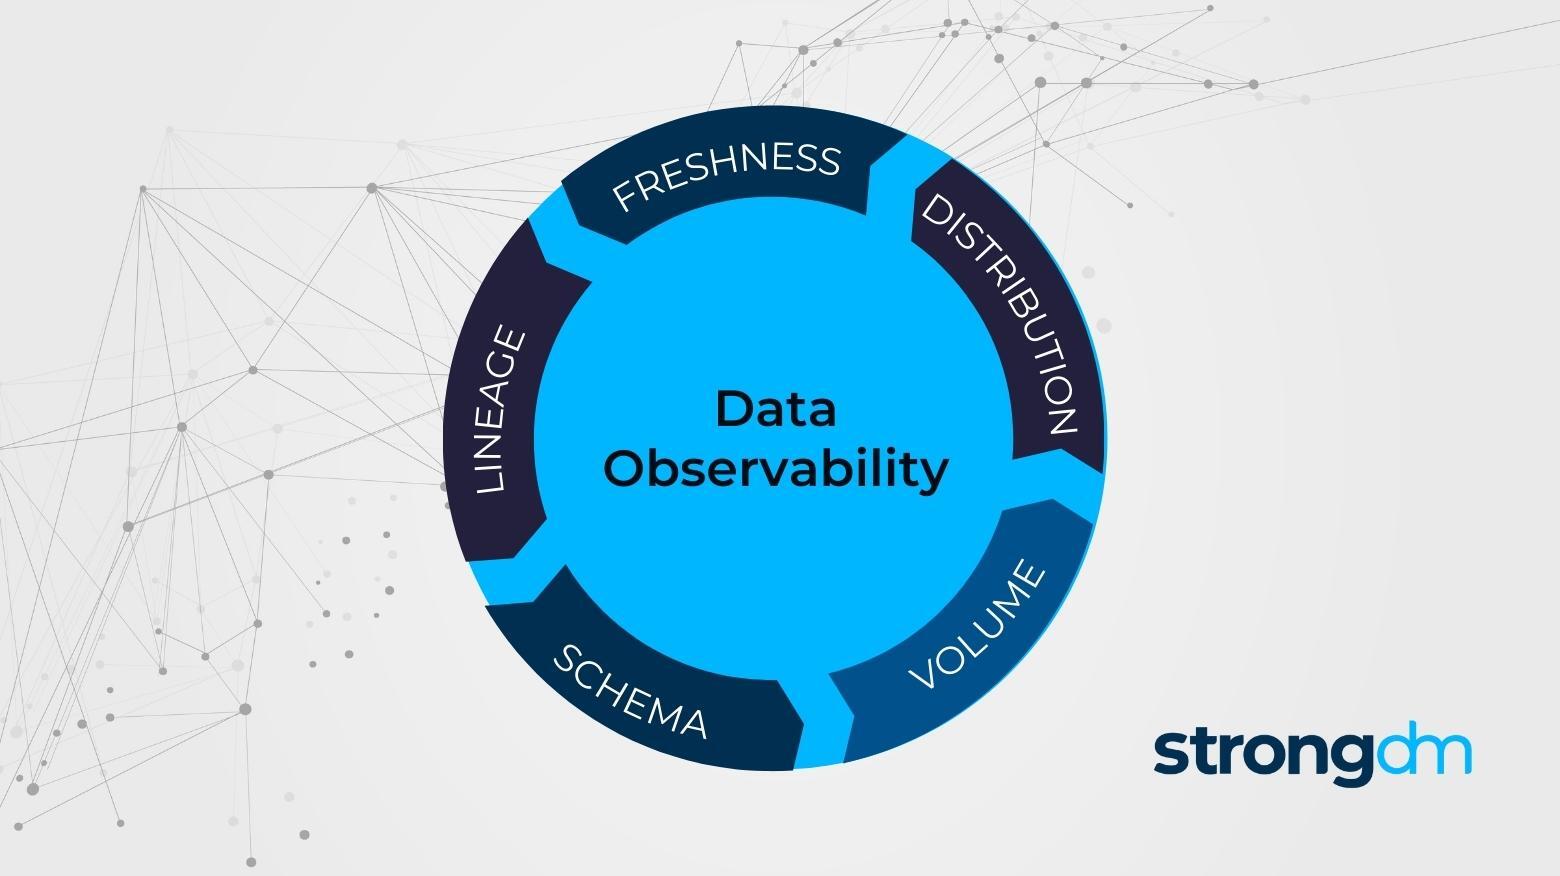 OK, but what is Data Observability?